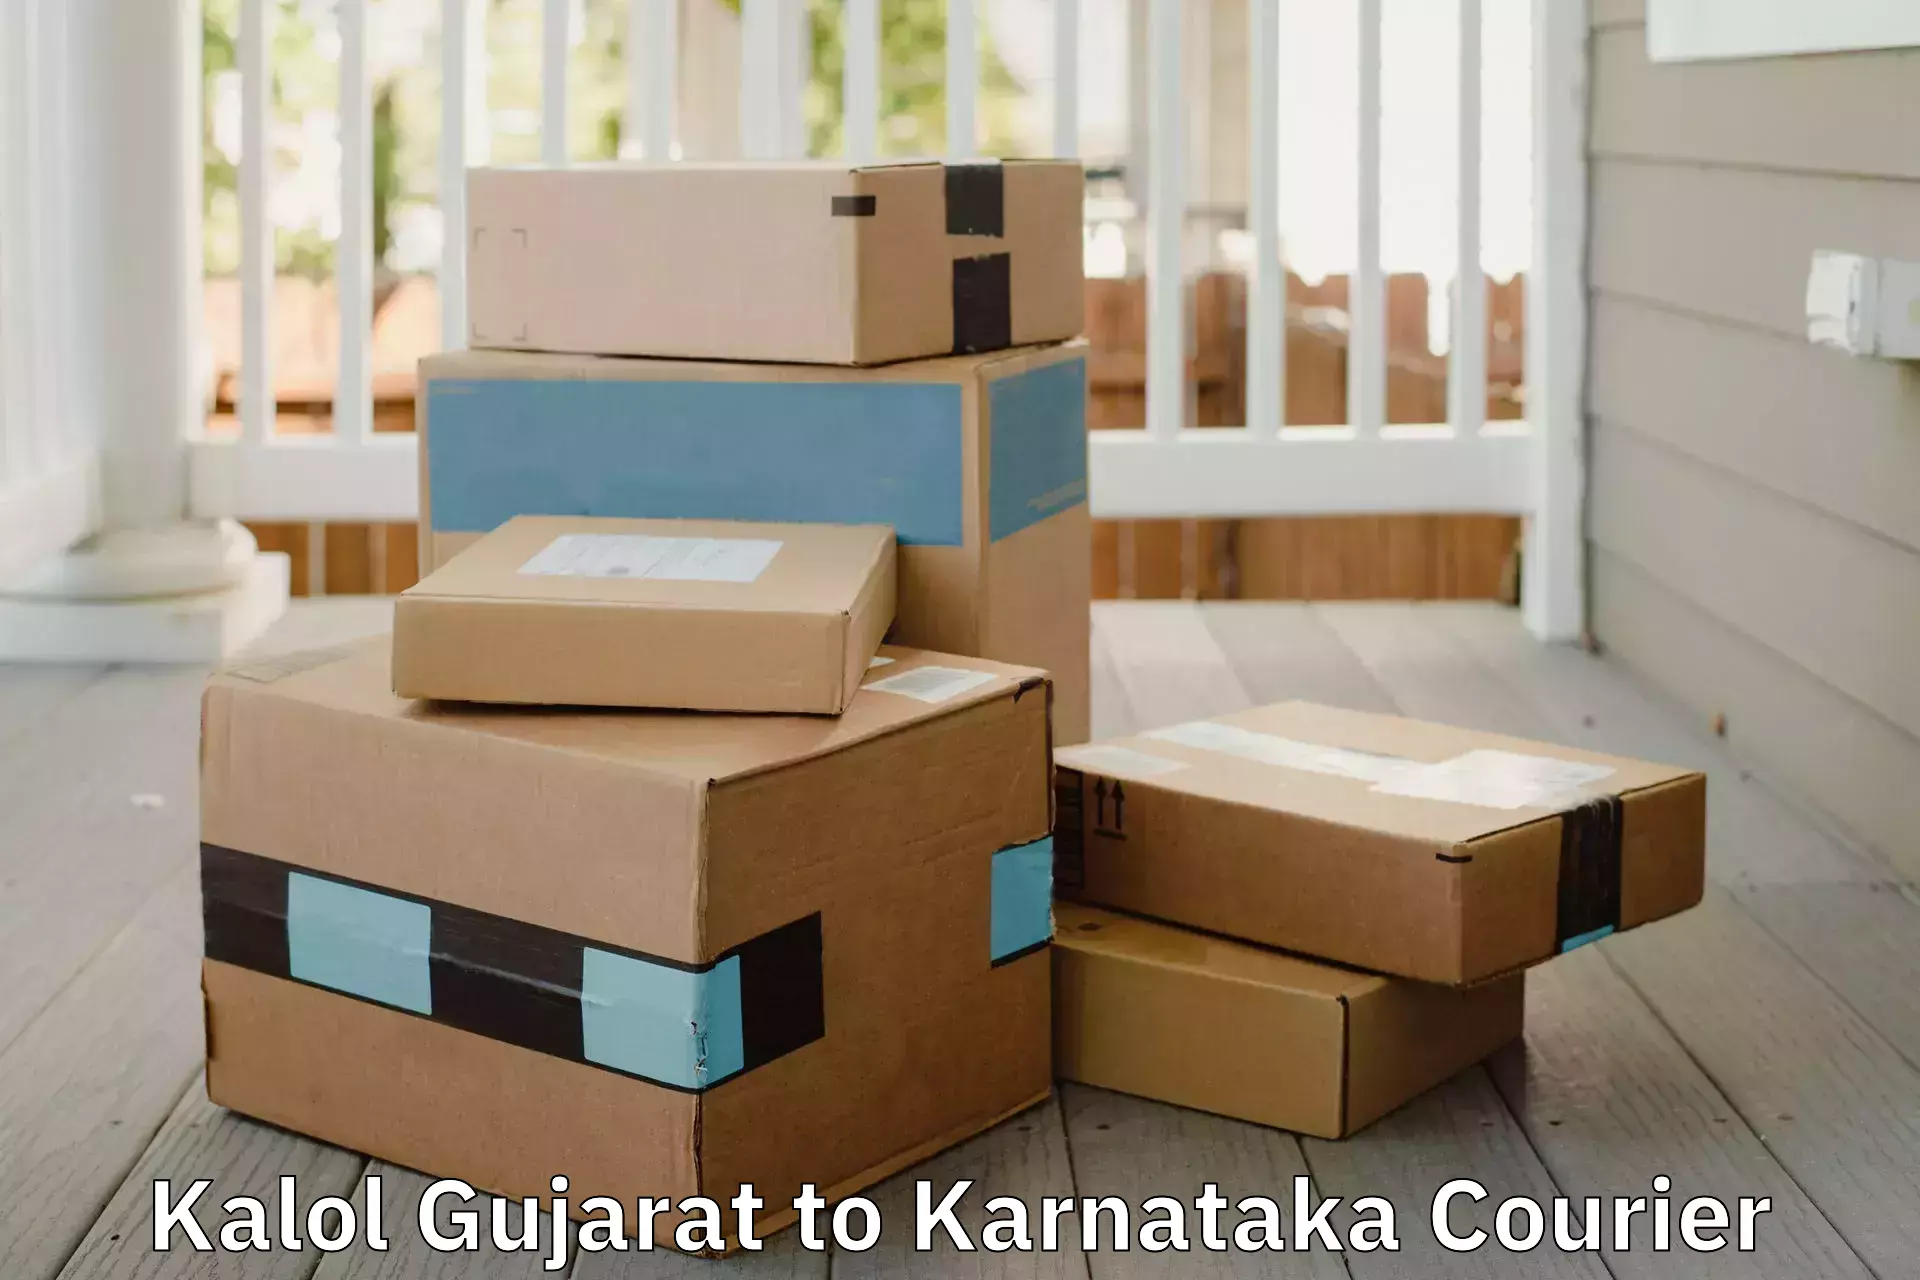 Trusted relocation services Kalol Gujarat to Shimoga